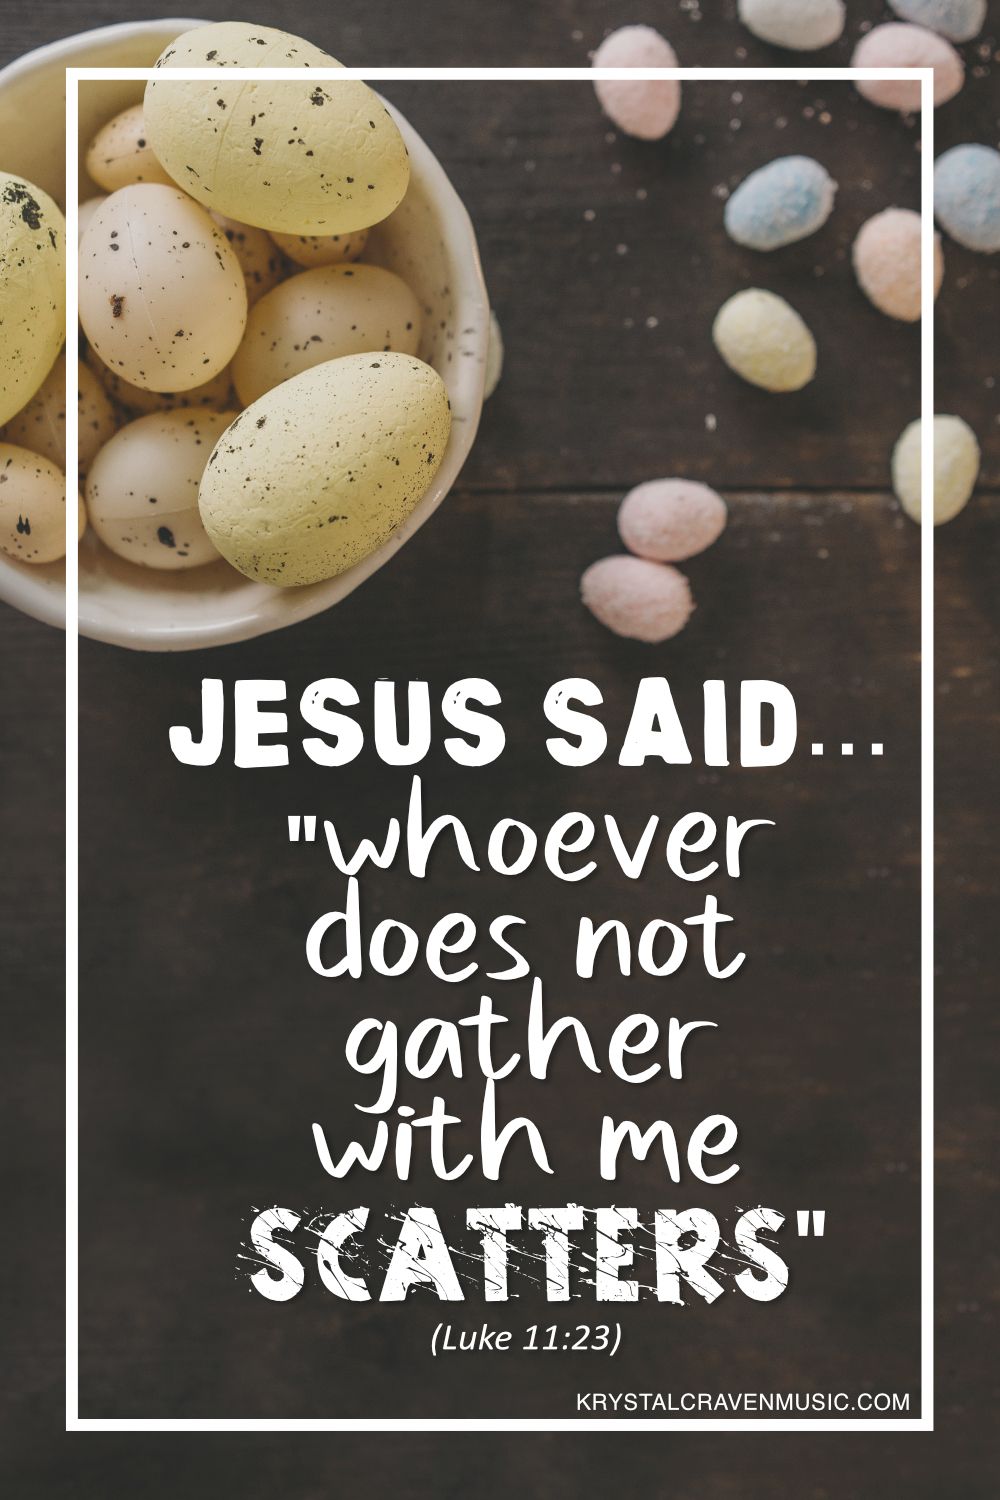 The text from Luke 11:23 "Jesus Said... 'whoever does not gather with me scatters'" overlaying eggs in a bowl on a wooden table with additional eggs scattered outside the bowl.